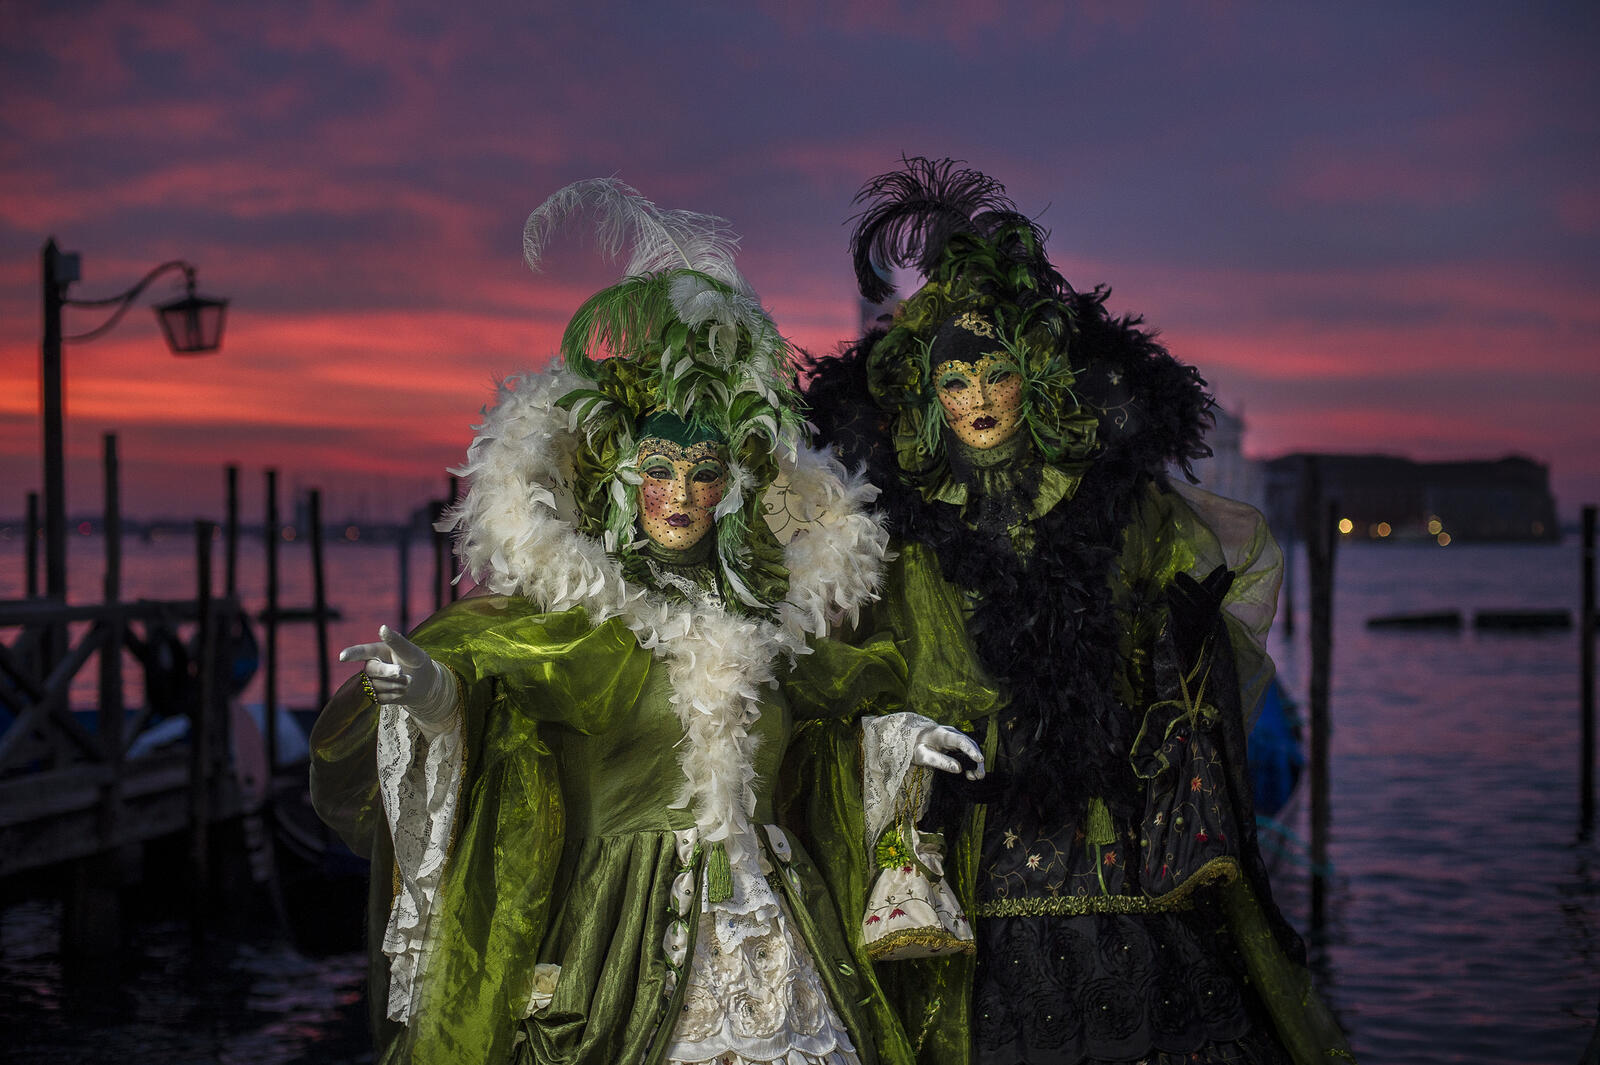 Wallpapers costumes holiday carnival in venice on the desktop